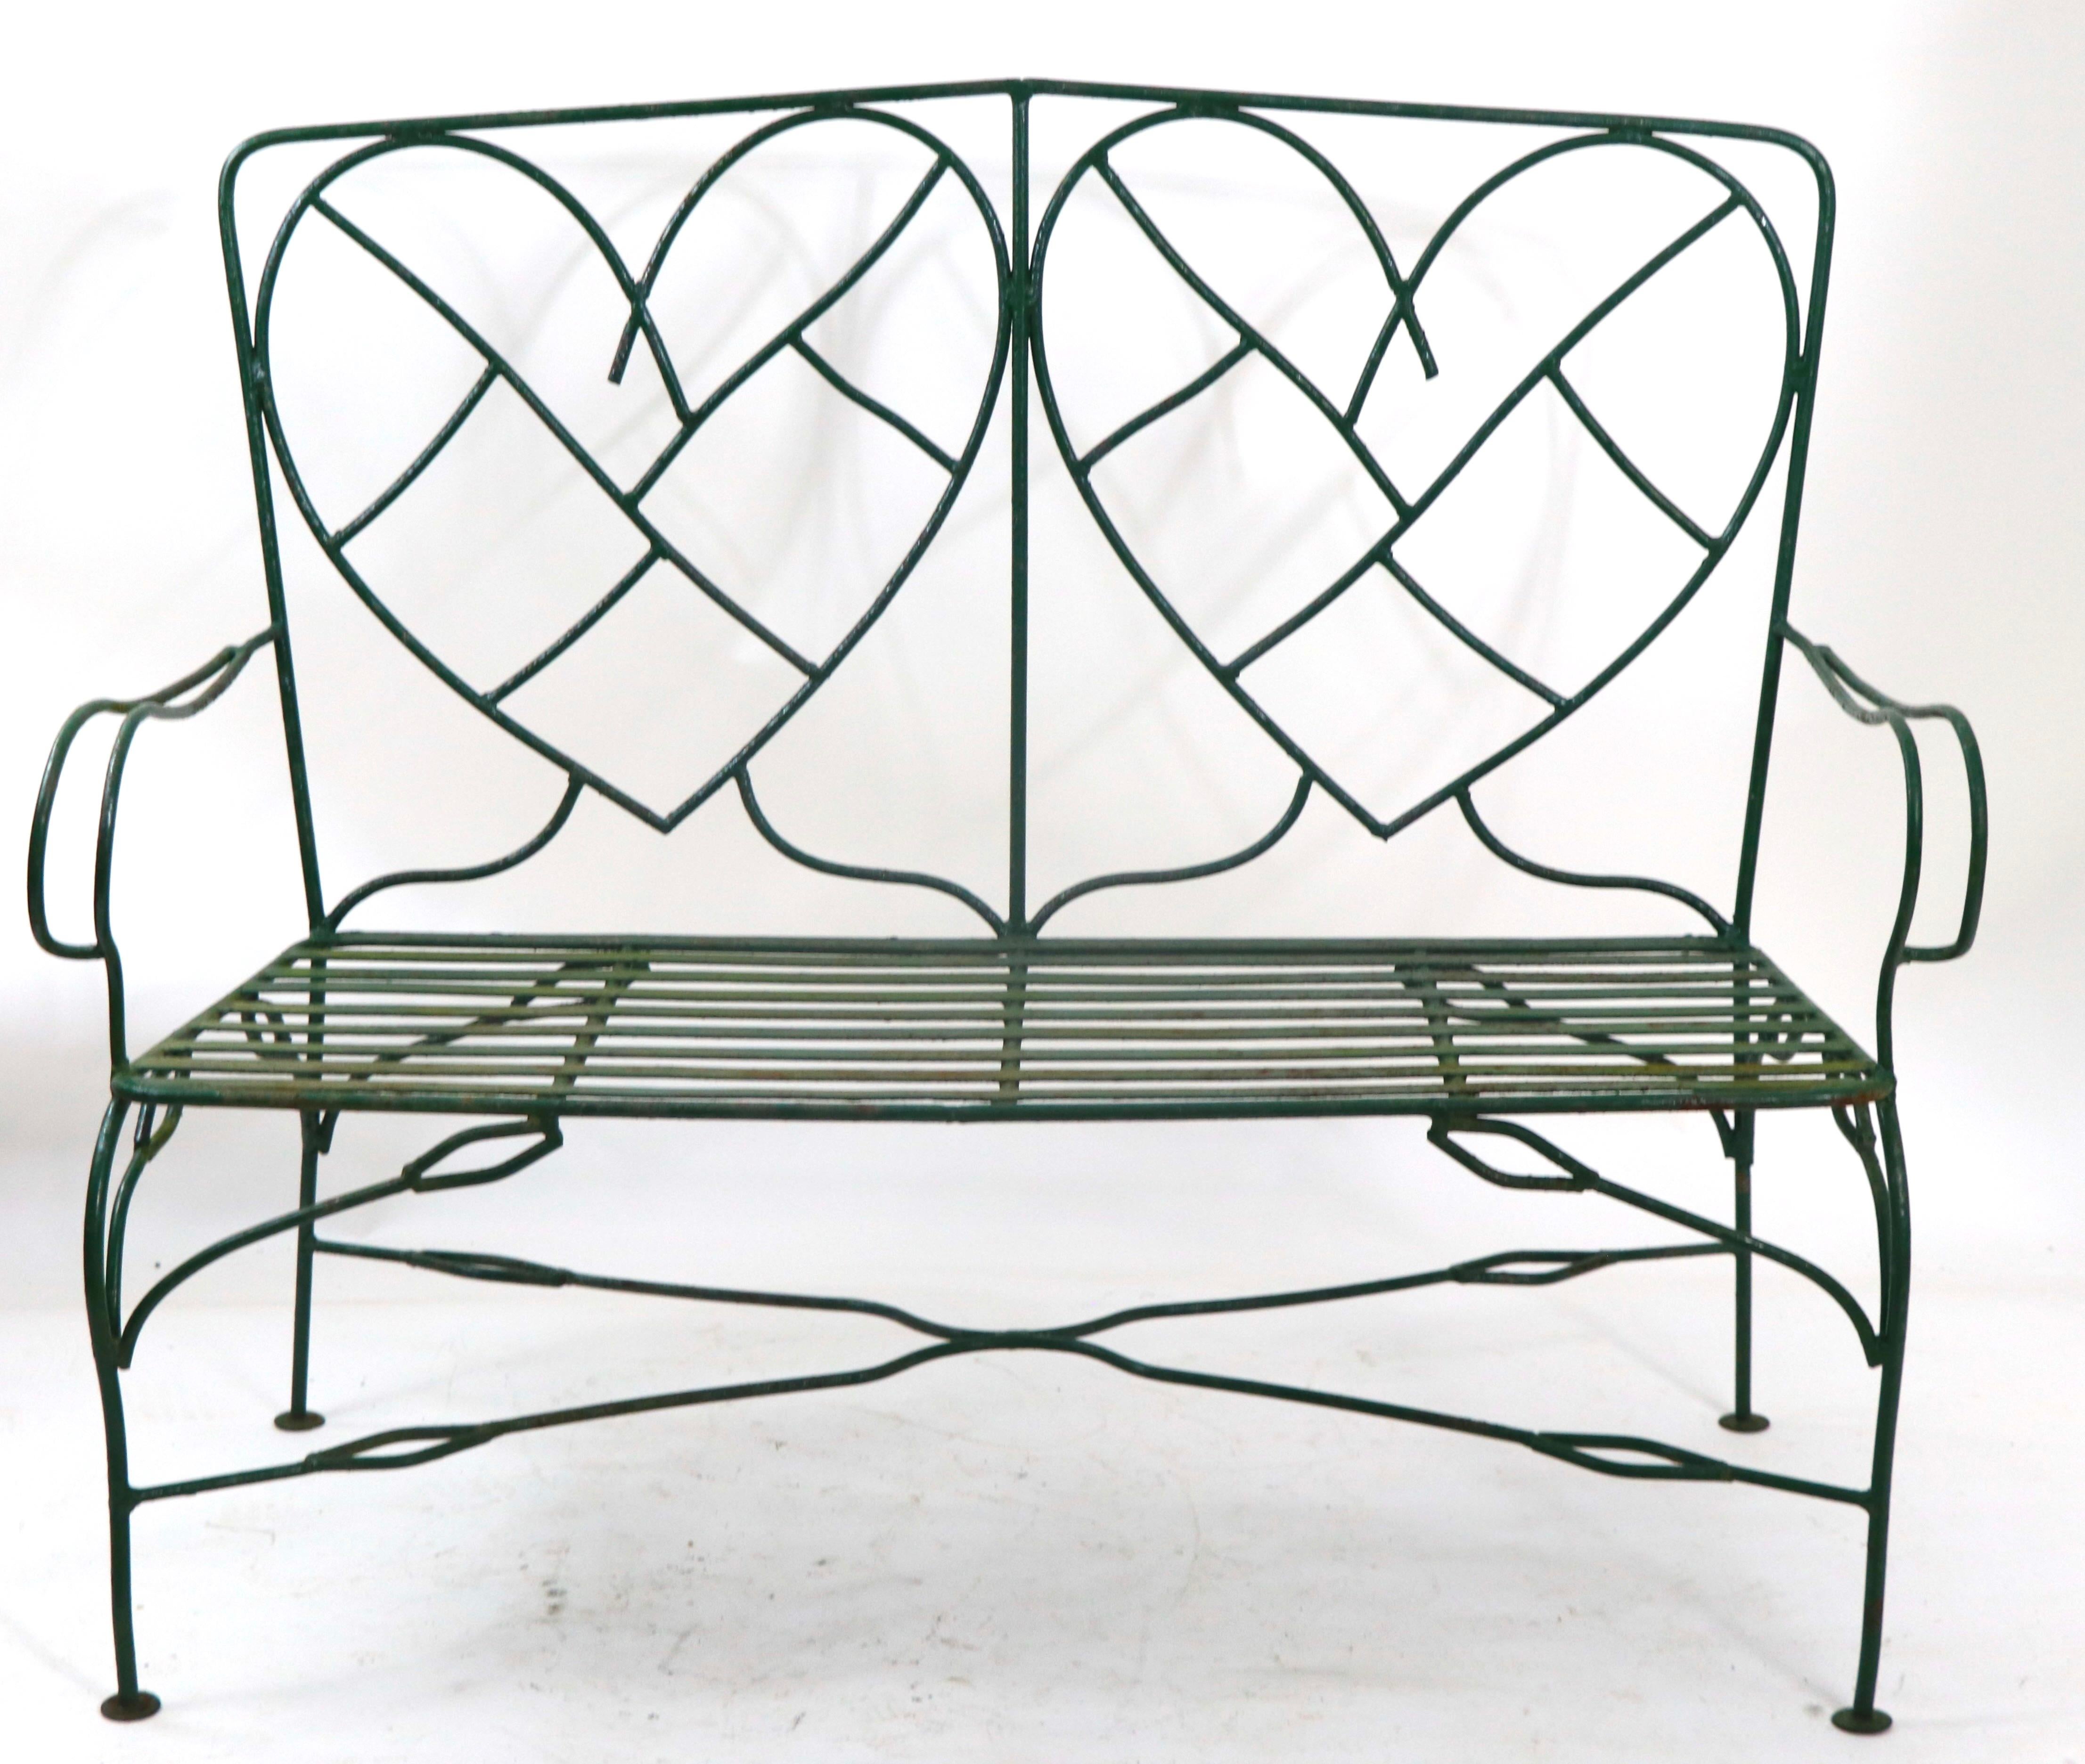 Exceptional, charming and romantic hand wrought iron settee, loveseat, bench, in very fine, original condition. The bench features a heart motif back rest, adding to the romantic feel of this unusual and possibly unique vintage bench. Perfect for